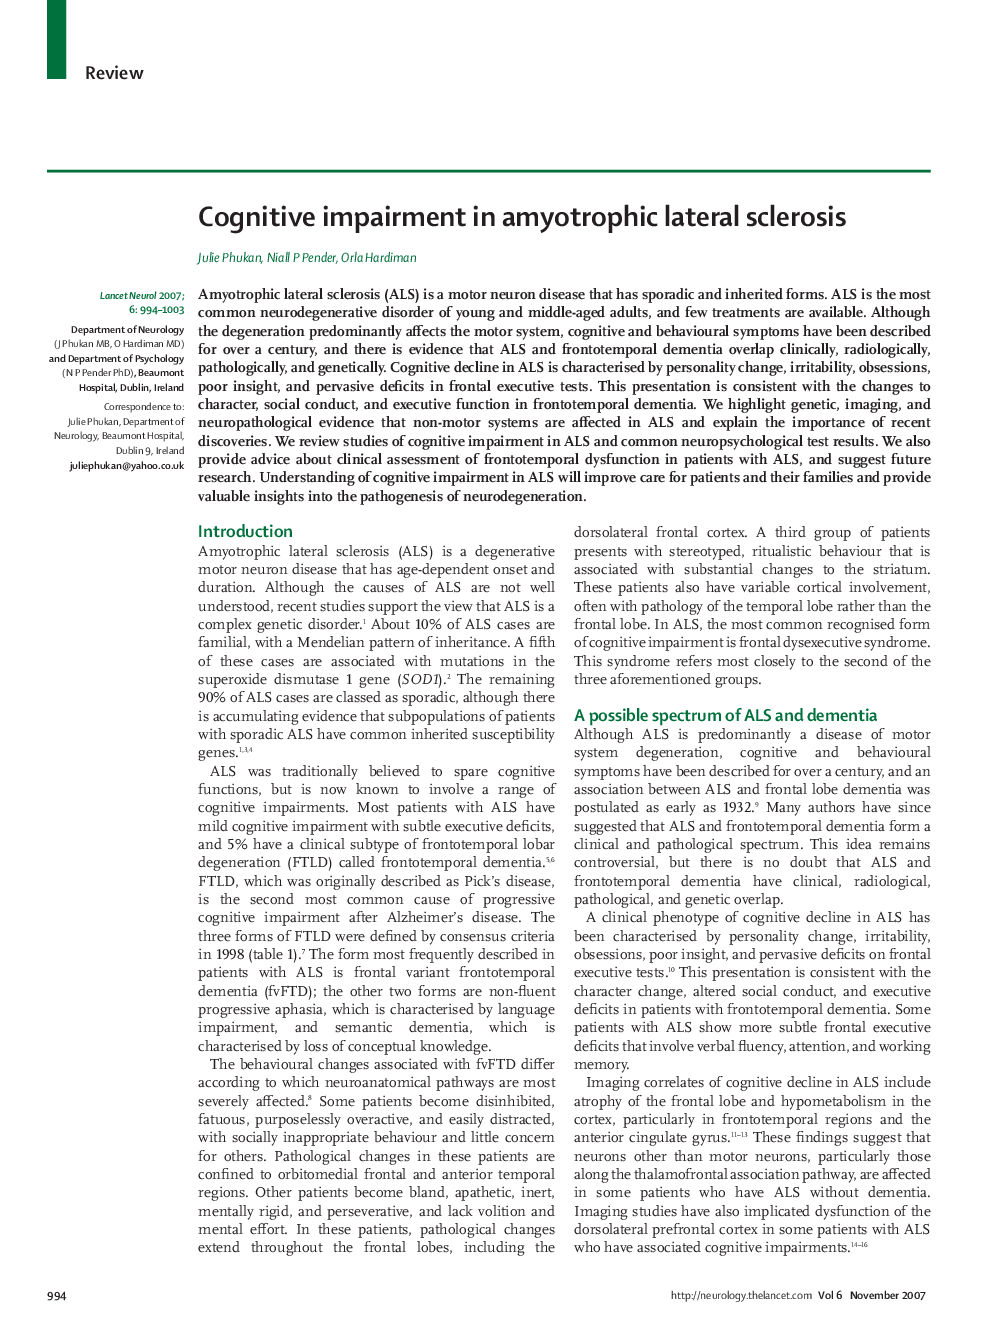 Cognitive impairment in amyotrophic lateral sclerosis